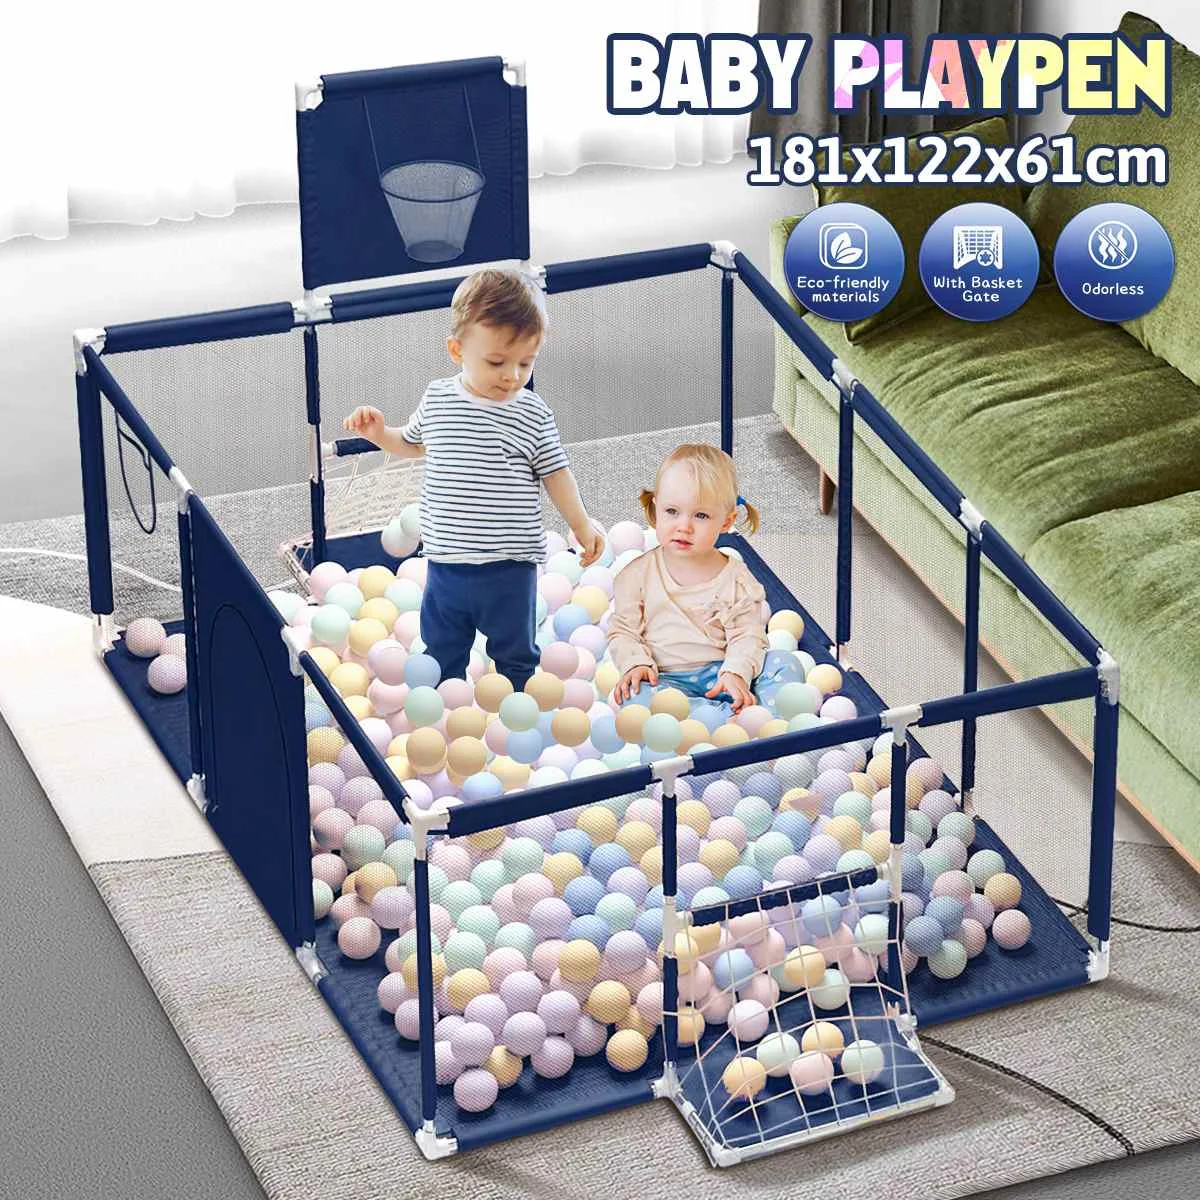 

Baby Playpen Kids Playground Furniture Baby Bed Barriers Safety Folding Baby Park Baby Crib Ball Home Dry Pool Accessories EU US